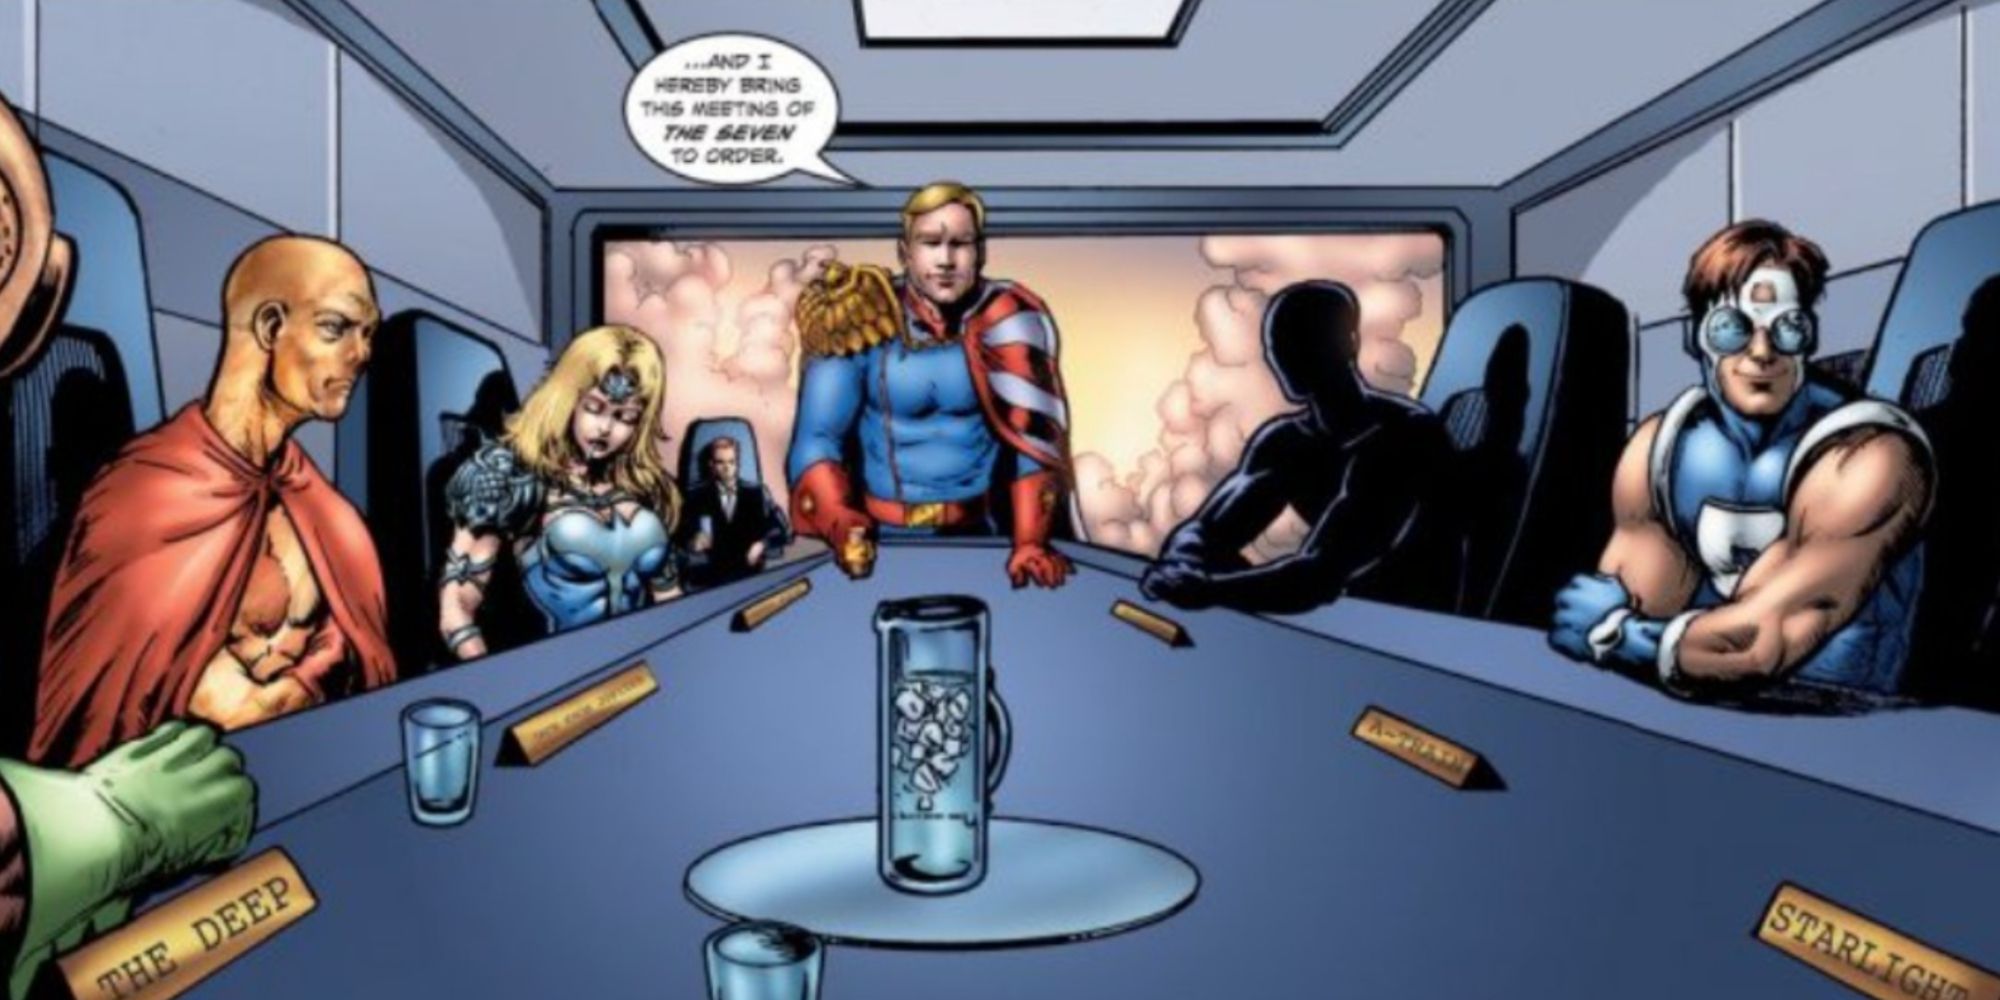 Homelander chairs a meeting of The Seven at Vought Towers in The Boys comics